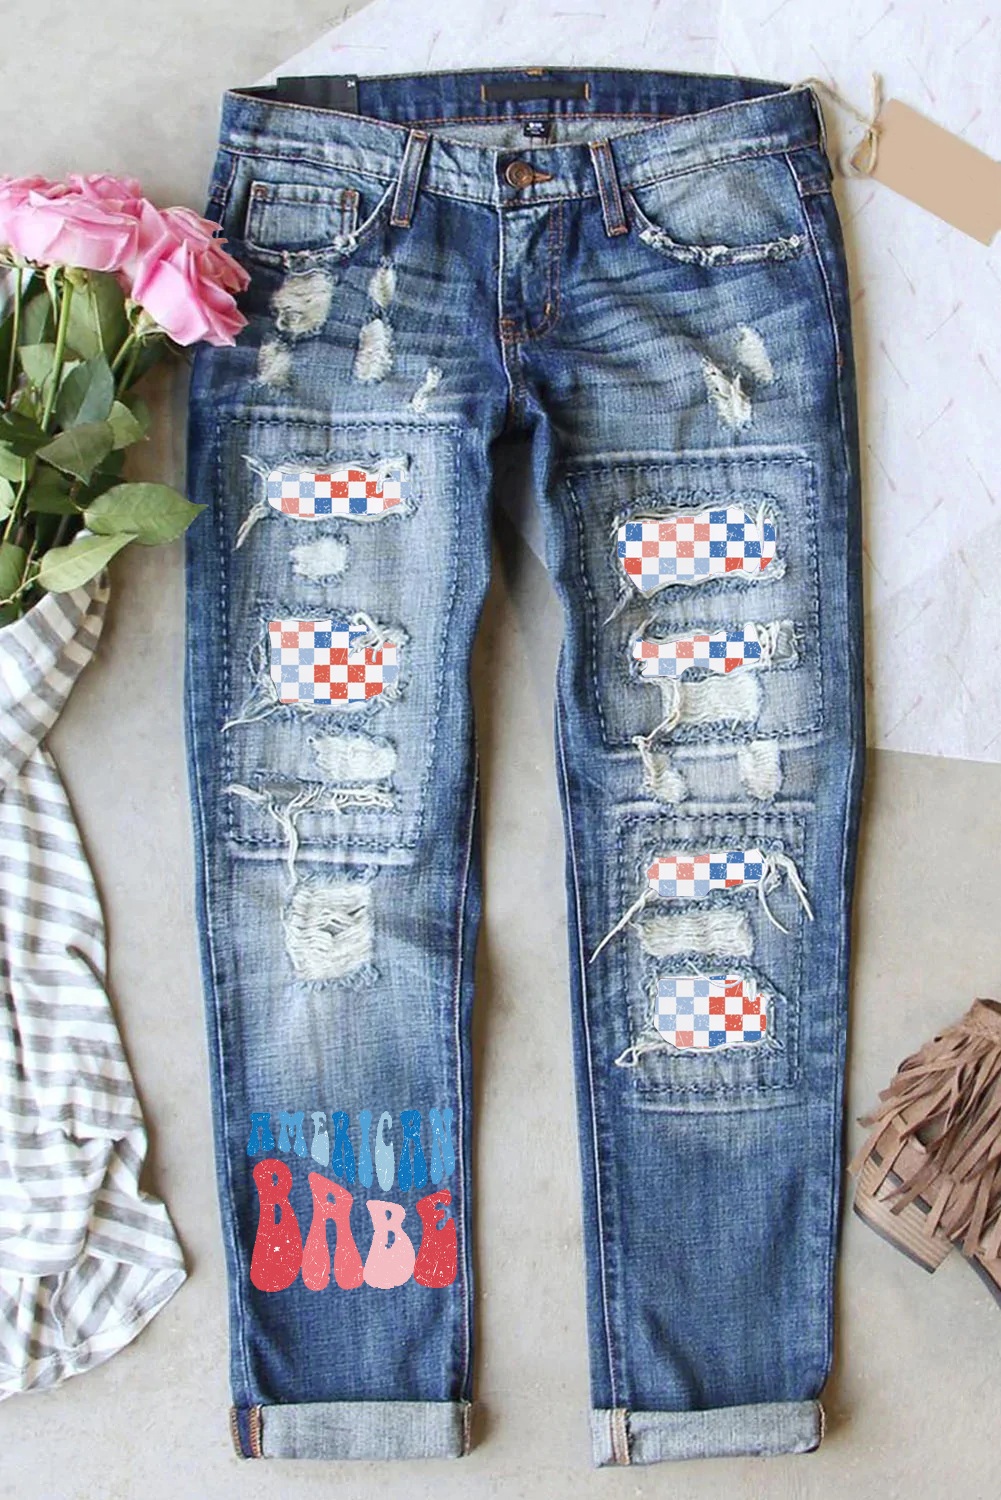 American babe jeans